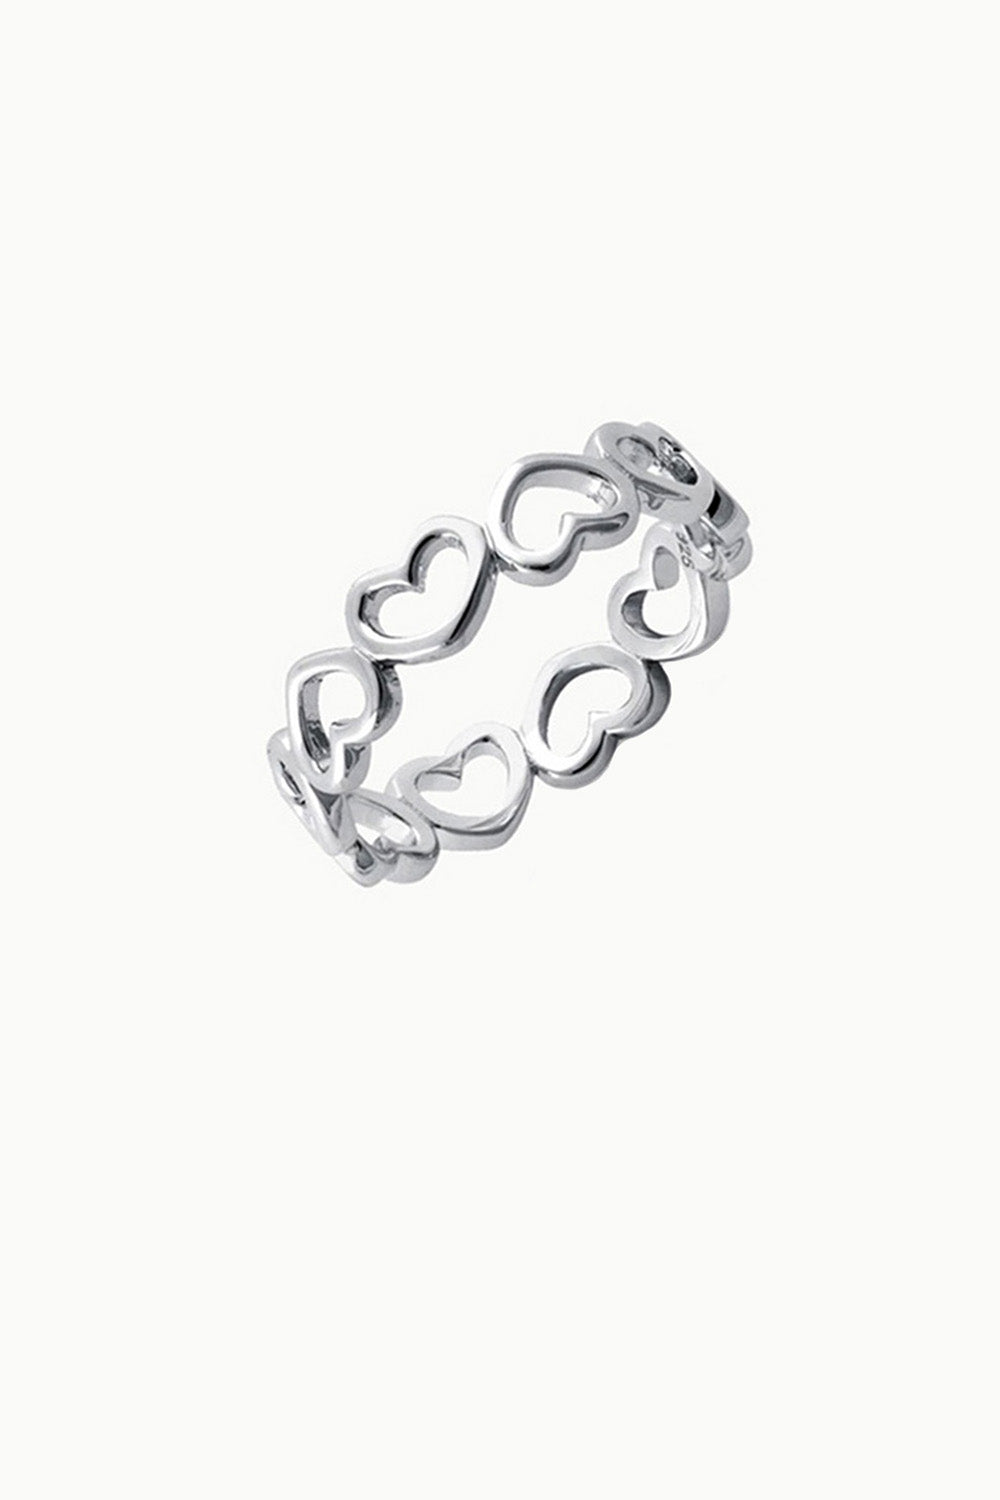 Sivalya Infinite Love Heart Band Ring Sterling Silver